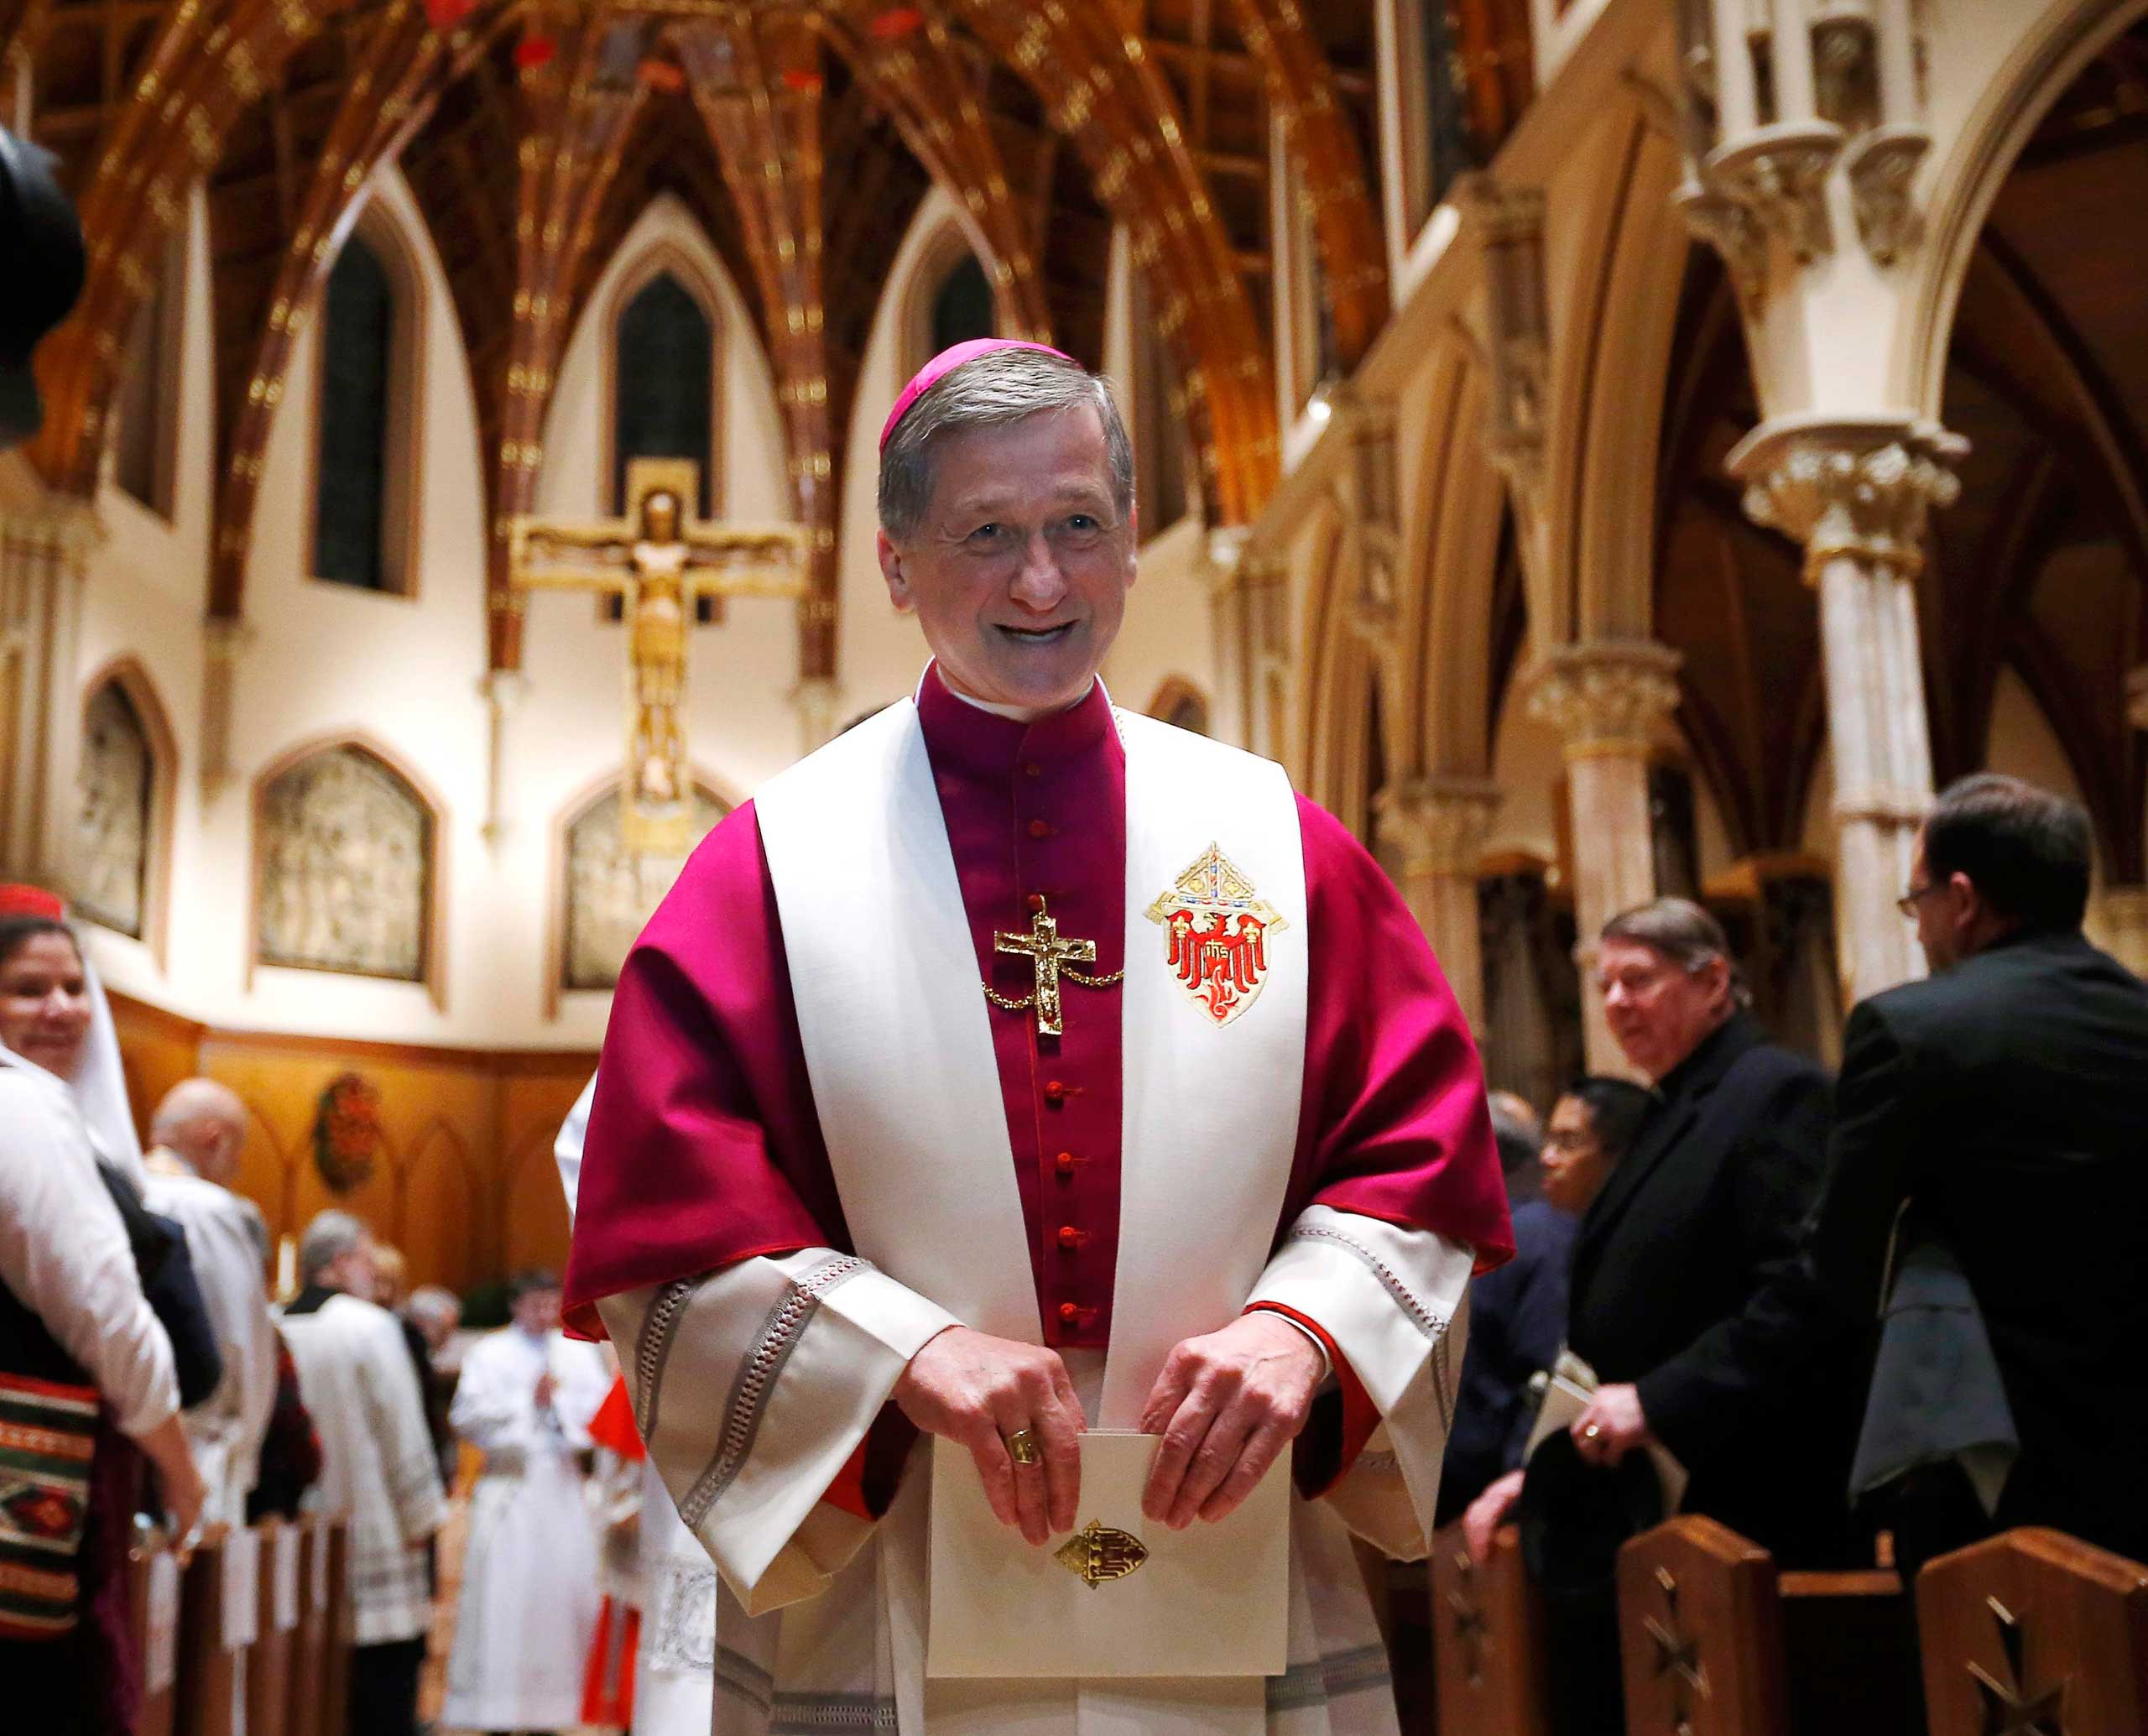 Bishop Blase Cupich, Pope Francis' first major appointment in the hierarchy of the U.S. Catholic Church, leaves Holy Name Cathedral as part of a ritual a day ahead of his installation as the new archbishop in Chicago, Nov. 17, 2014. (Jeff Haynes—Reuters)